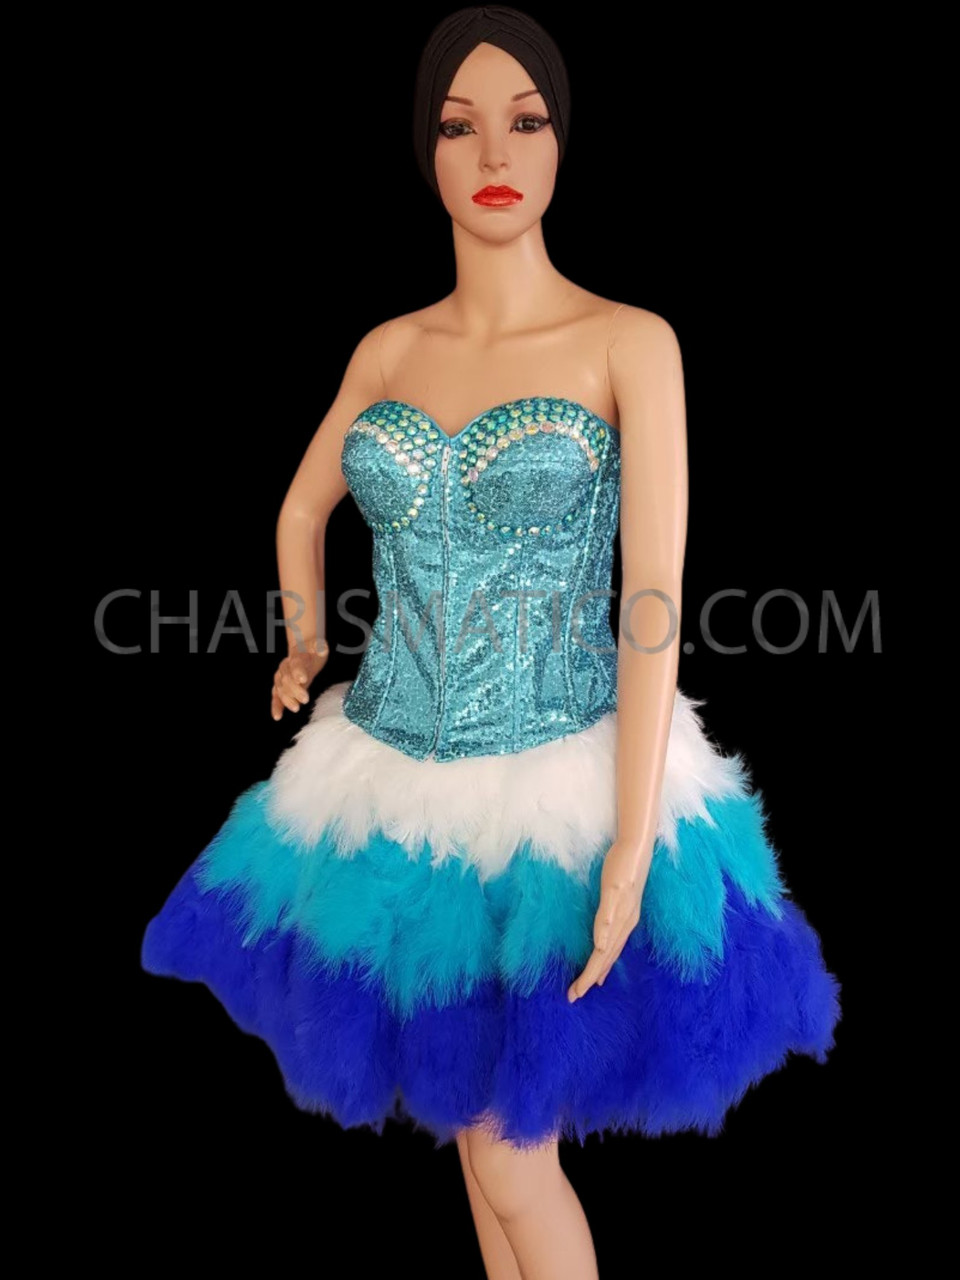 Pale Blue Corset, Matching Royal Blue Feathered Skirt And Collar